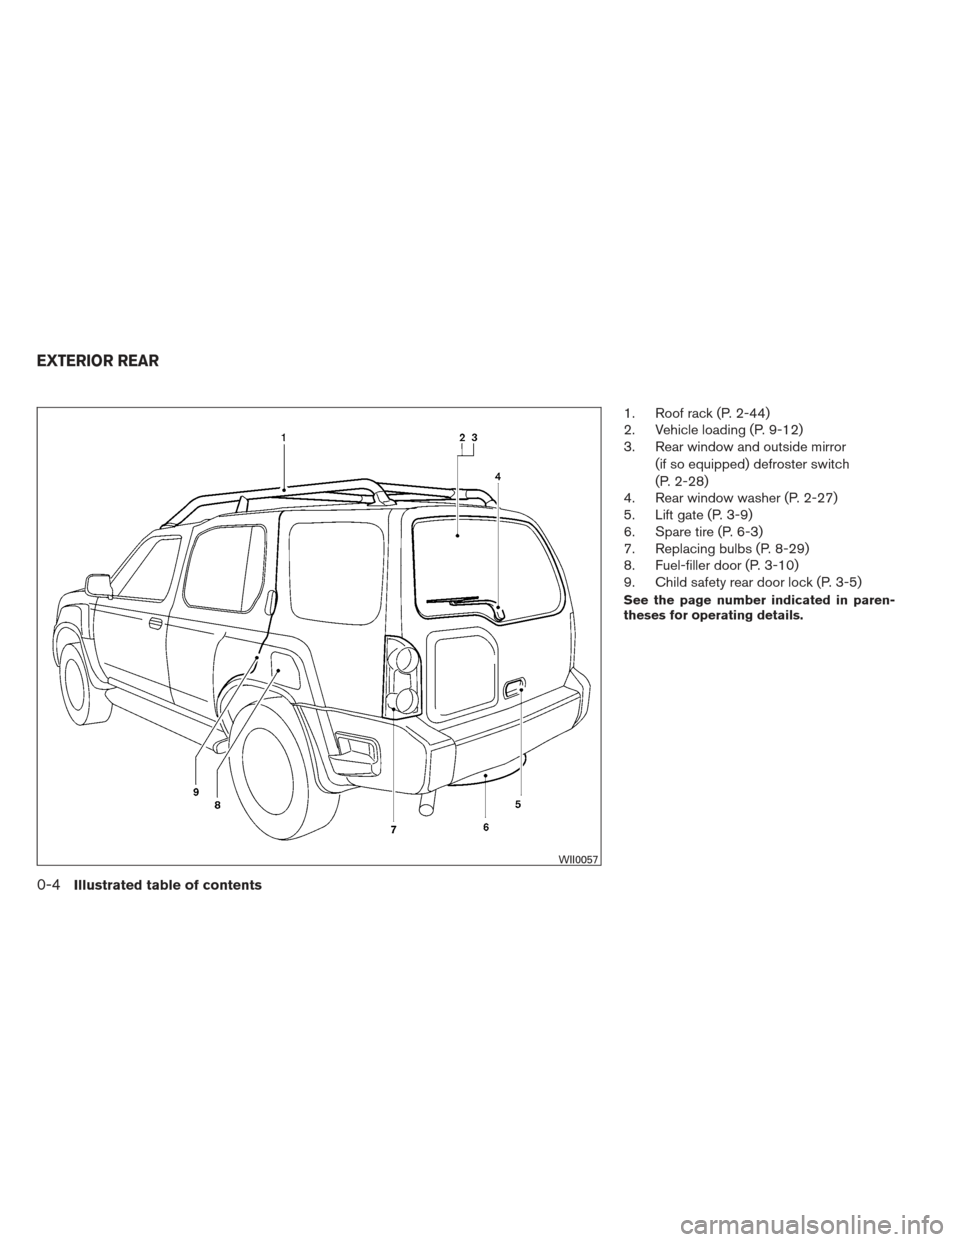 NISSAN XTERRA 2013 N50 / 2.G User Guide 1. Roof rack (P. 2-44)
2. Vehicle loading (P. 9-12)
3. Rear window and outside mirror(if so equipped) defroster switch
(P. 2-28)
4. Rear window washer (P. 2-27)
5. Lift gate (P. 3-9)
6. Spare tire (P.